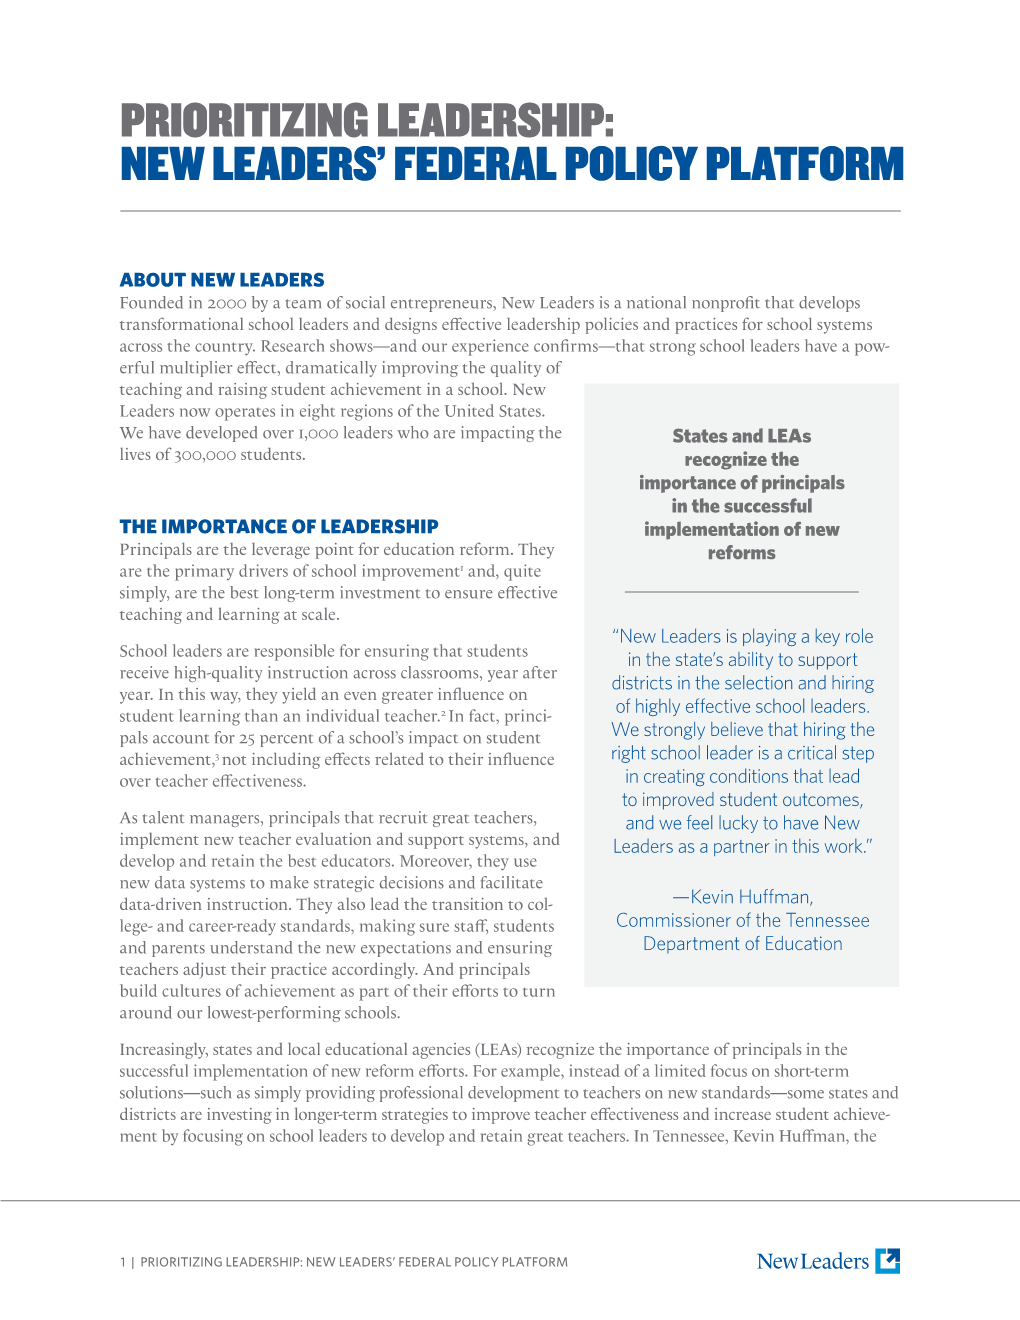 Prioritizing Leadership: New Leaders' Federal Policy